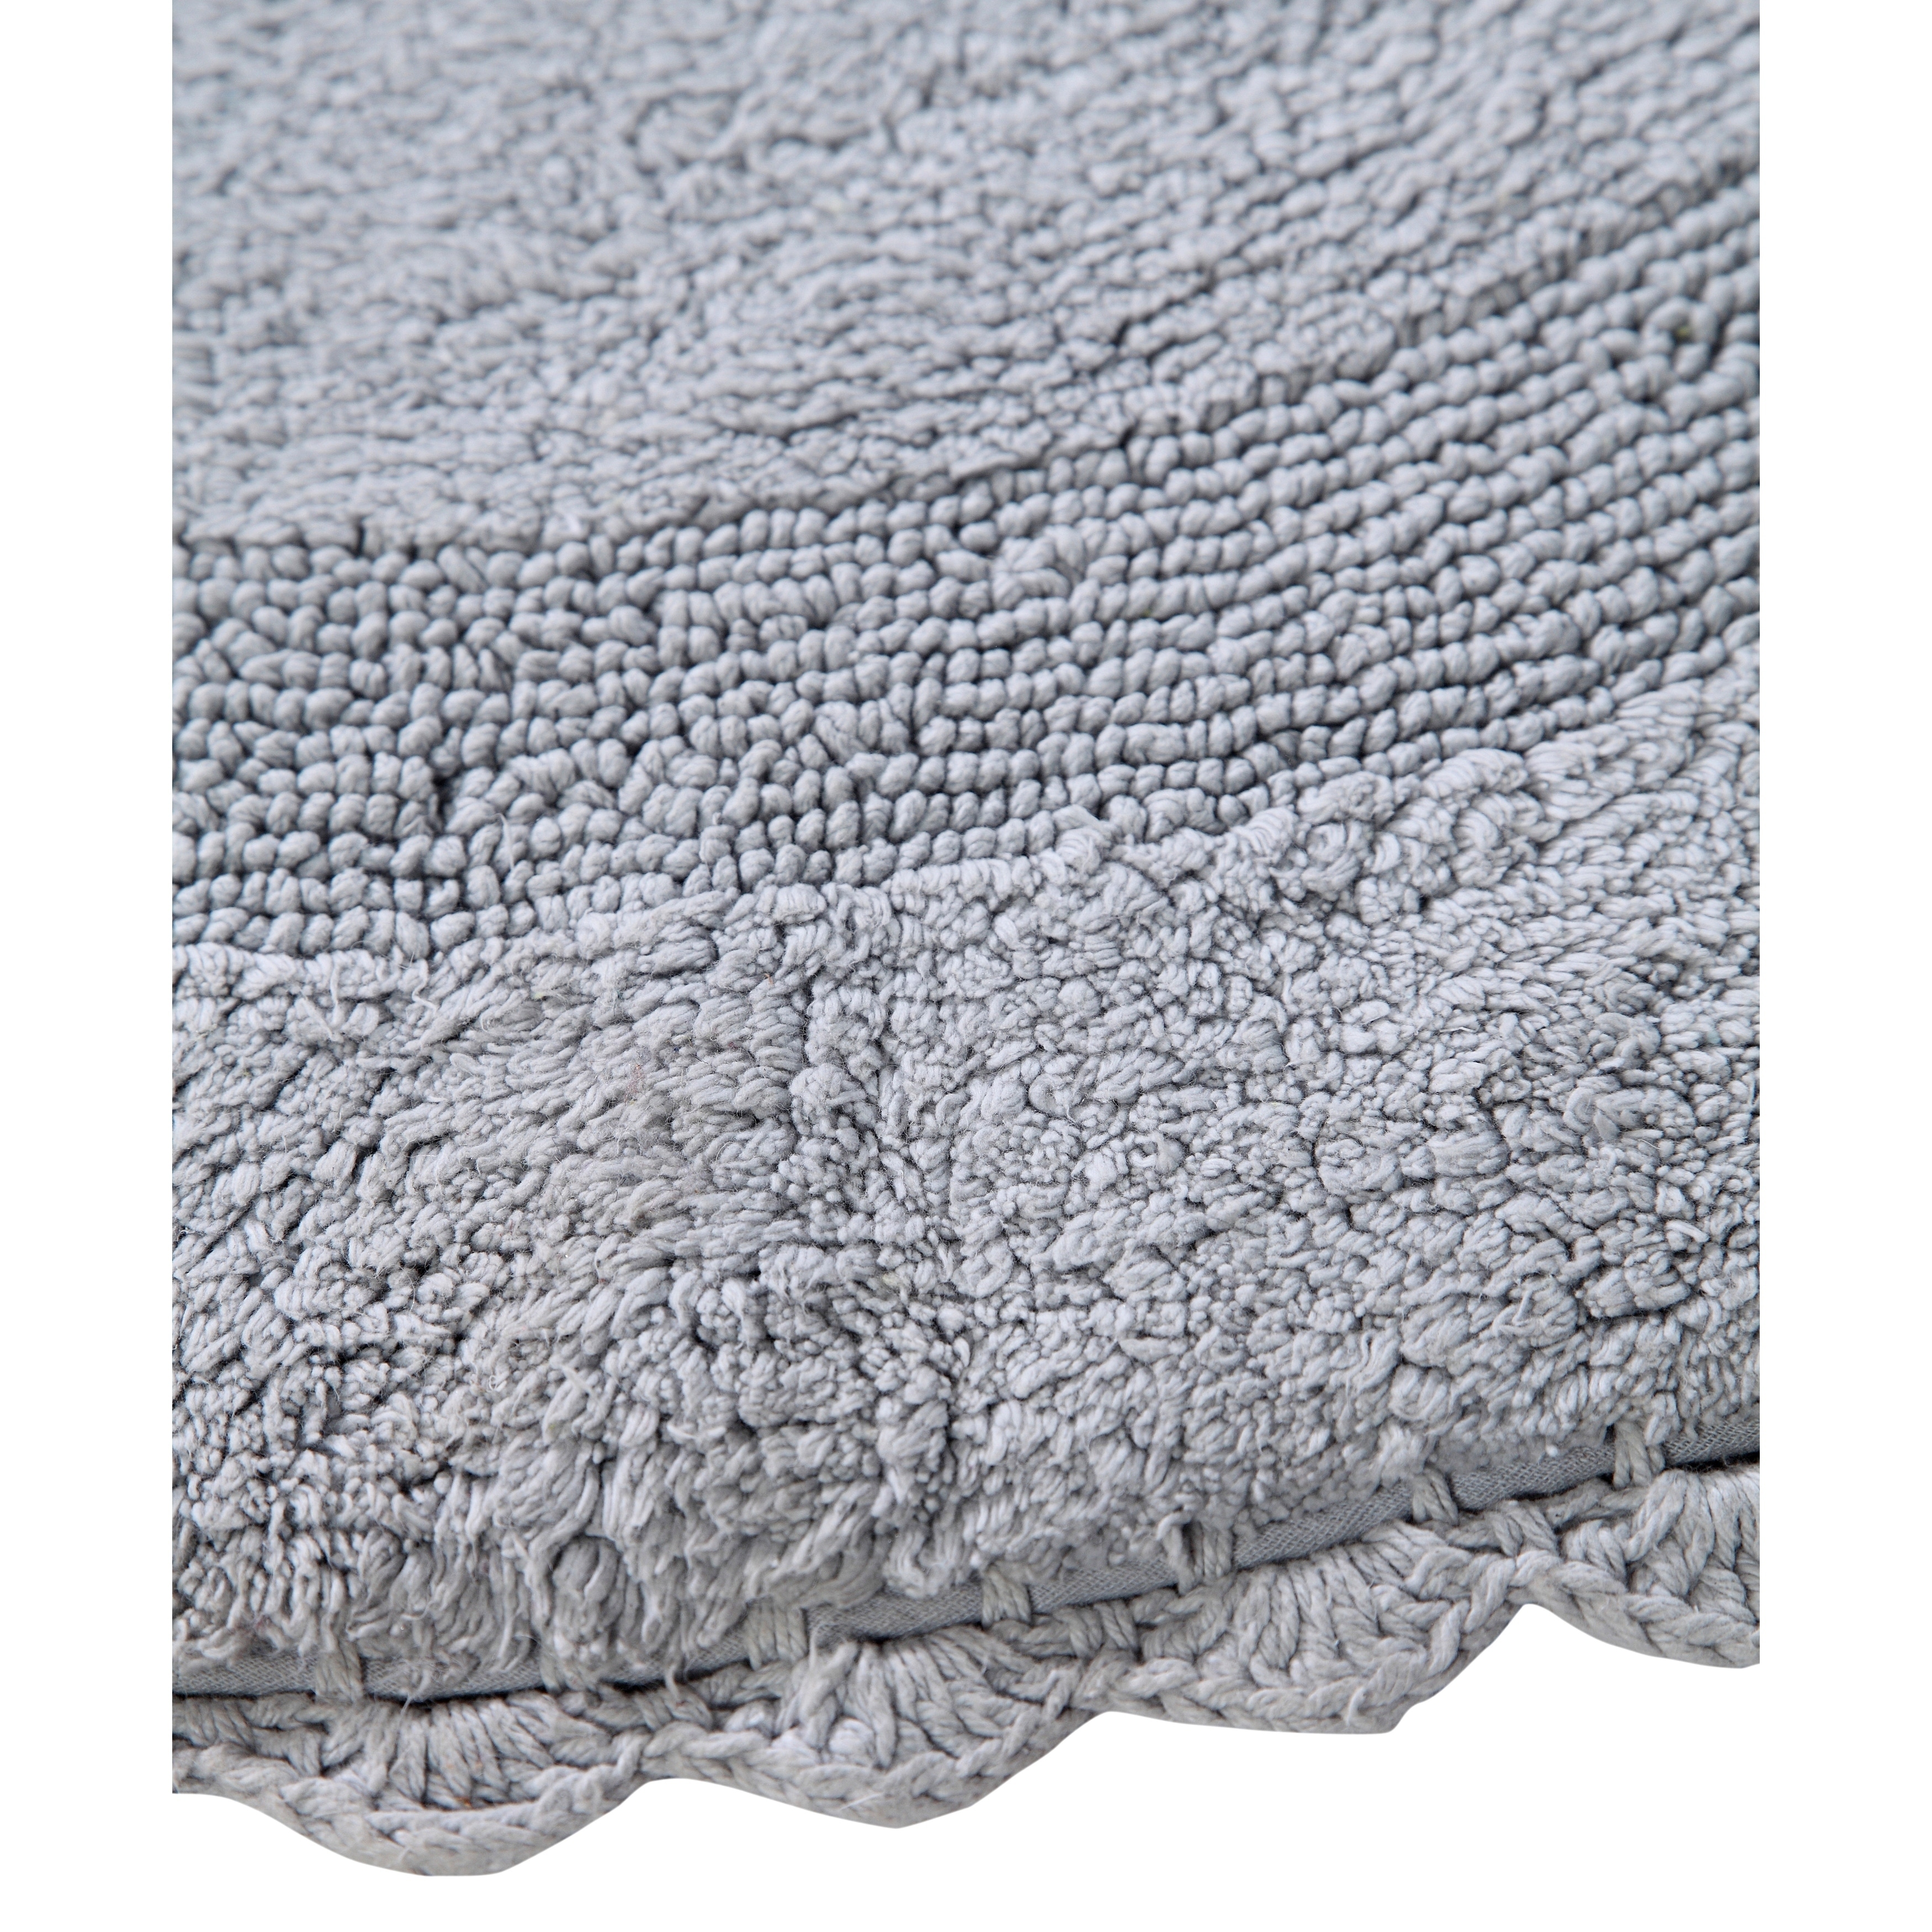  RAJRANG Bathroom Rug for Kitchen and Spa with Crochet Pattern  Cotton Absorbent Soft Reversible Bath Mat Light Grey Square 24 Inches :  Home & Kitchen